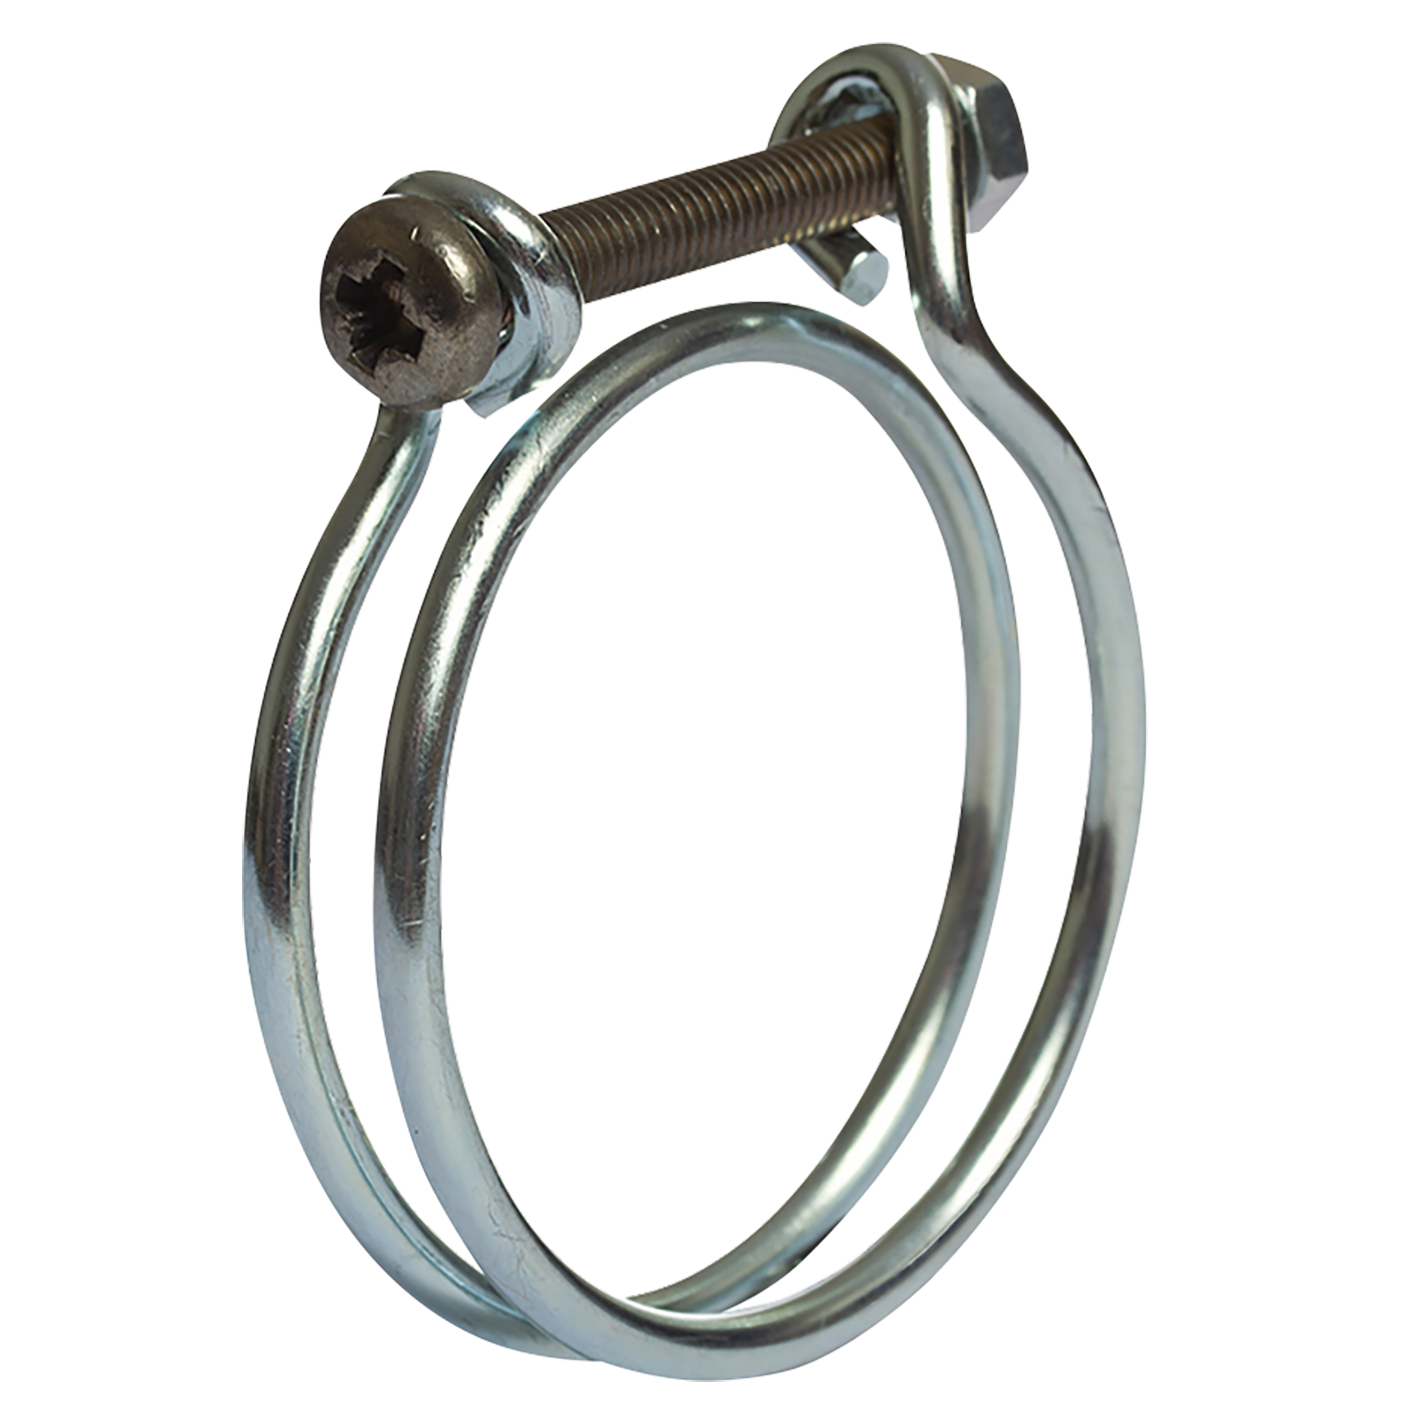 75MM ST/ST R/HAND SPIRAL WRAP CLAMP